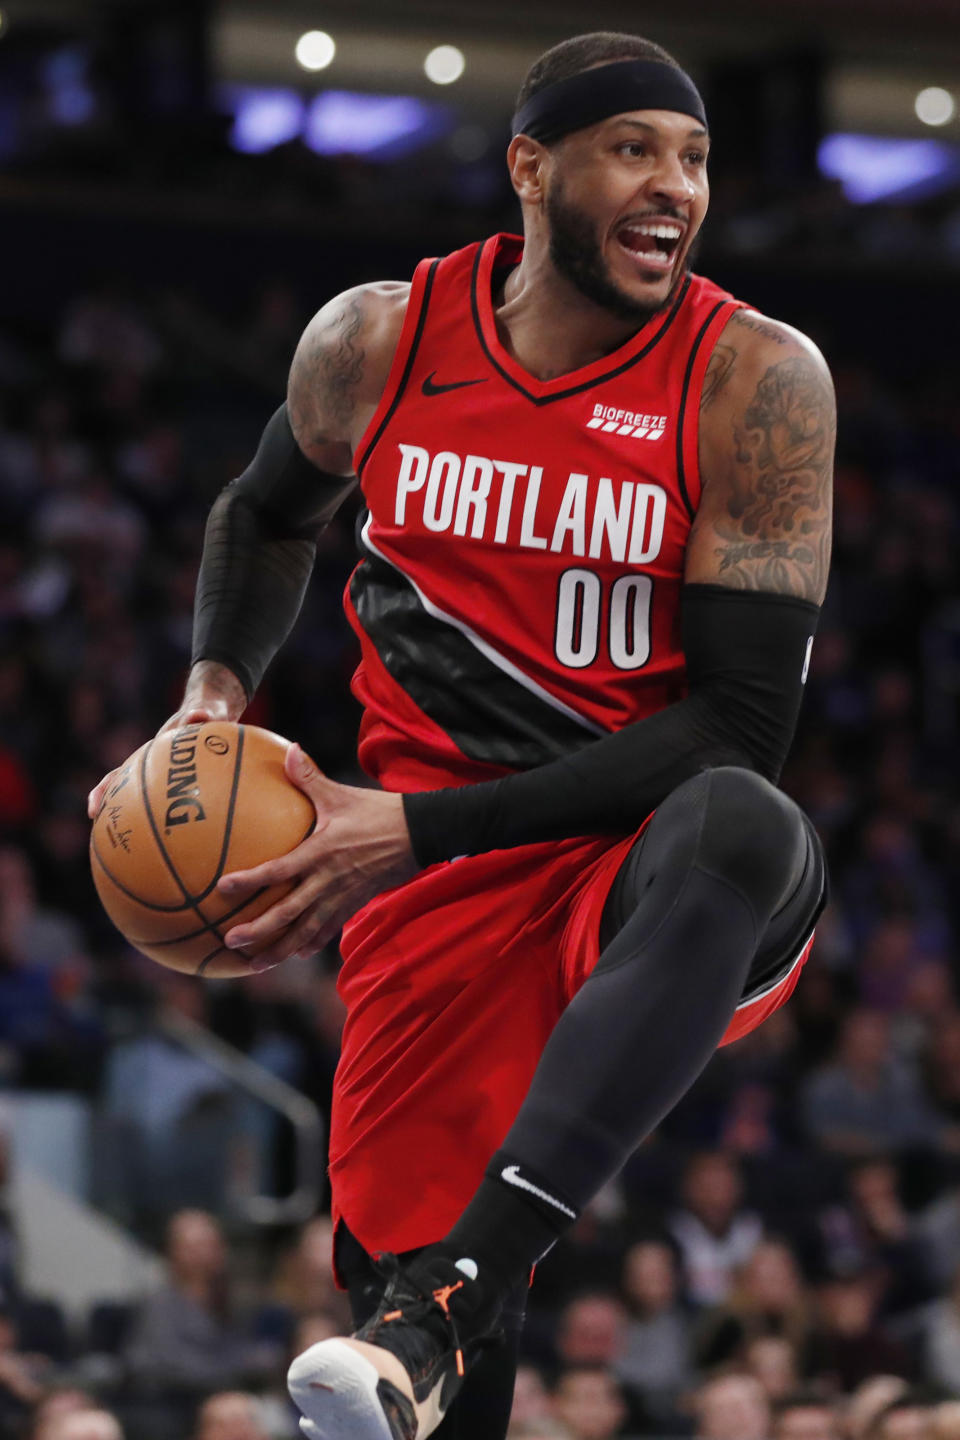 Portland Trail Blazers forward Carmelo Anthony pulls down a rebound during the second half of the team's NBA basketball game against the New York Knicks in New York, Wednesday, Jan. 1, 2020. (AP Photo/Kathy Willens)